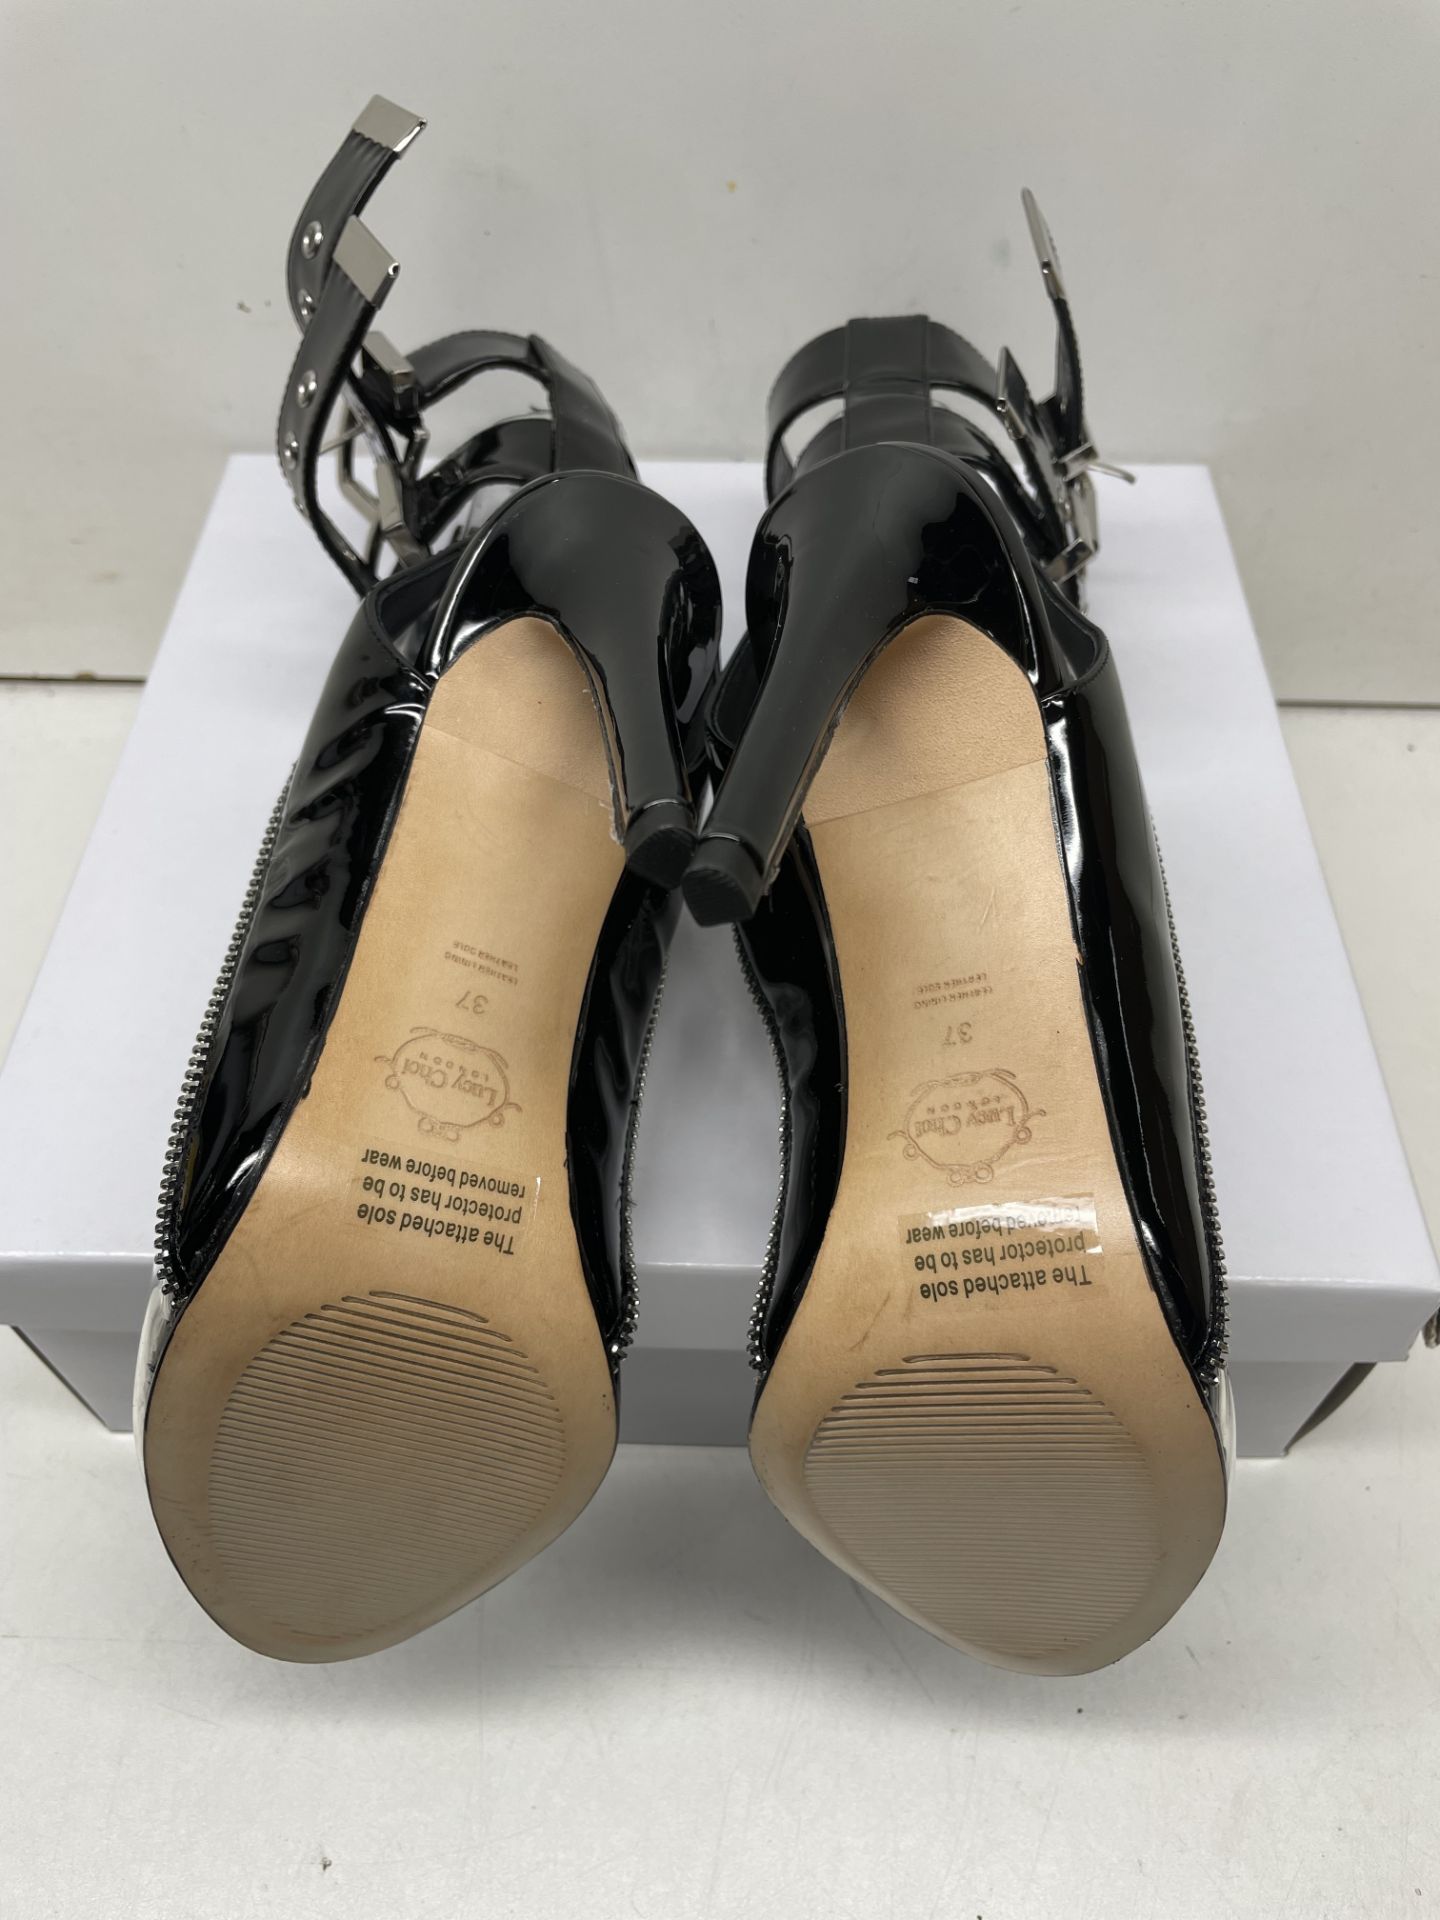 Ex-Display Lucy Choi Stiletto Heel Patent Leather Shoes | Eur 37.5 - Image 3 of 5